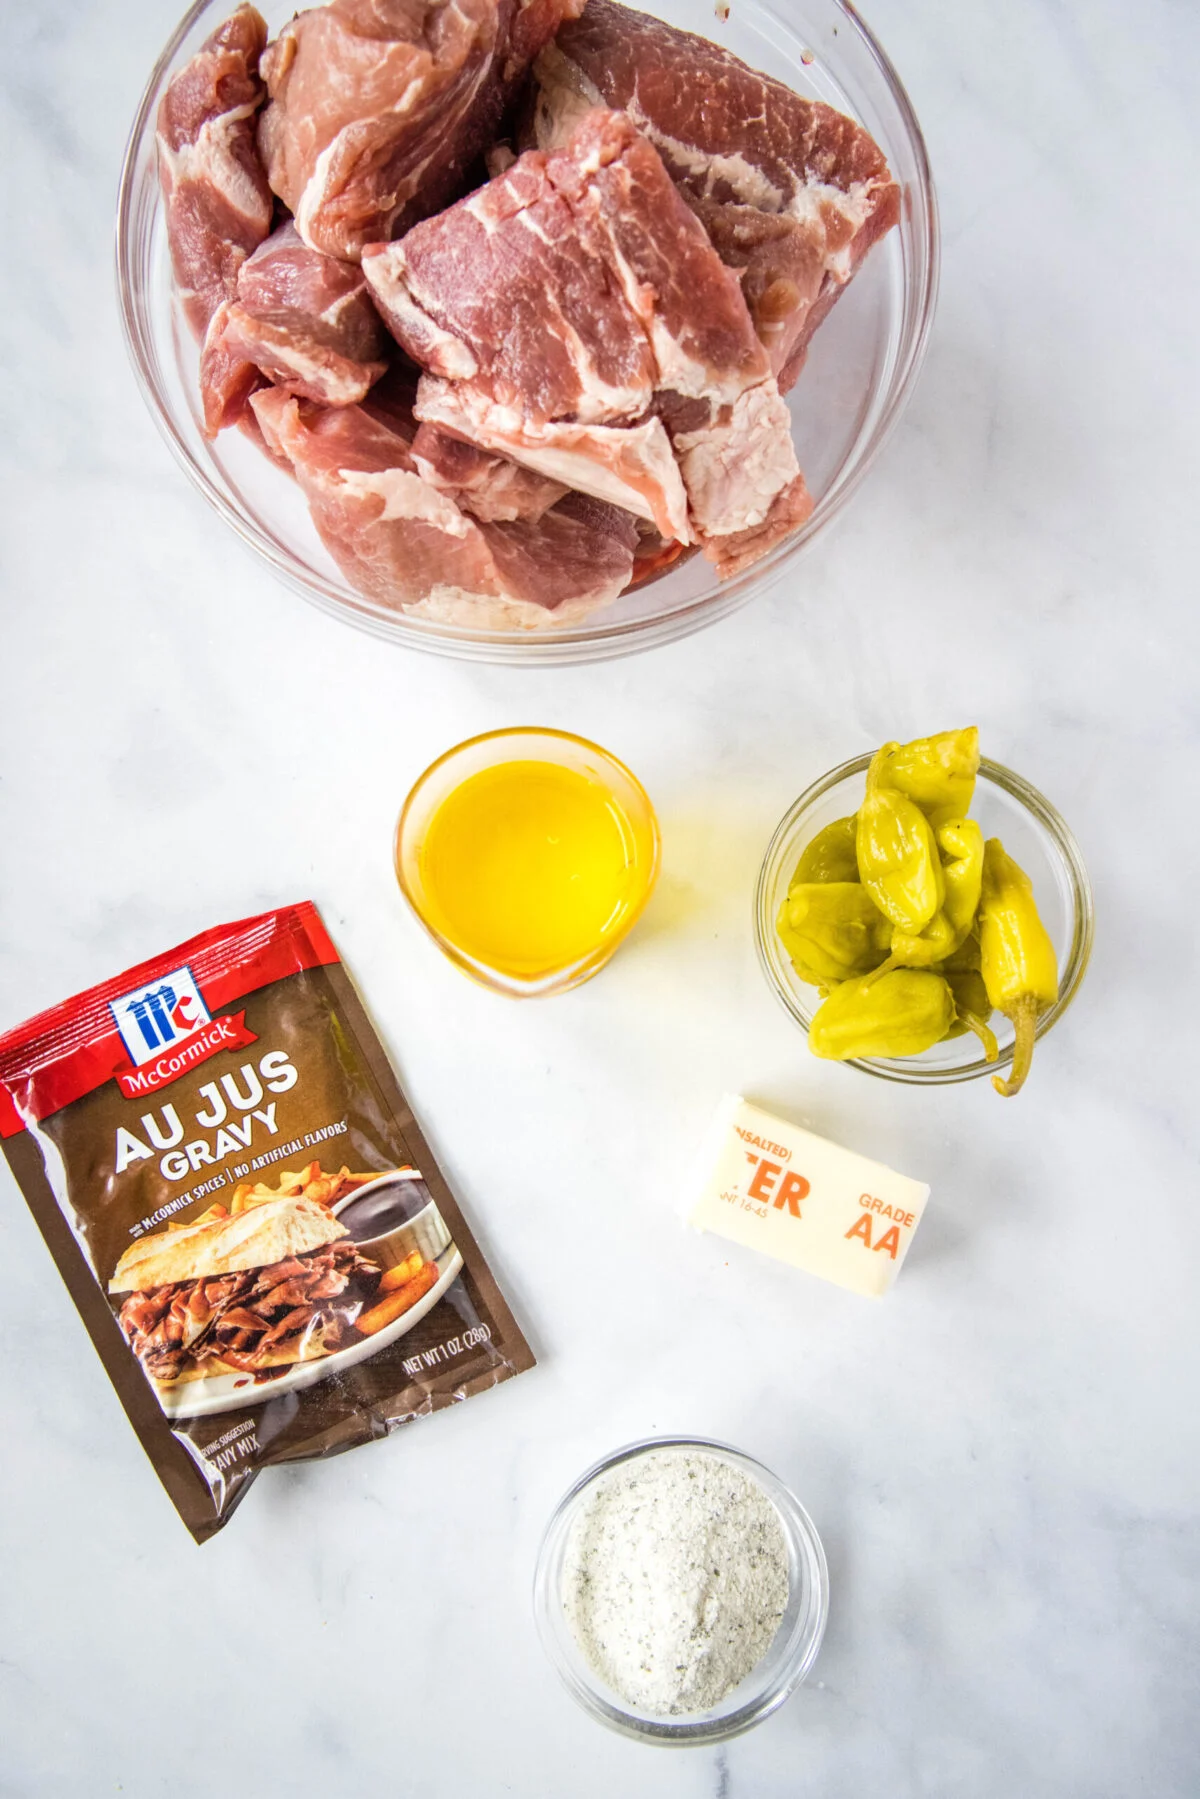 Overhead view of the ingredients needed for Mississippi pork roast: a bowl of pork shoulder, a bowl of pepperoncinis, a bowl of pepperoncini juice, a bowl of ranch dressing mix, a packet of au jus, and a stick of butter